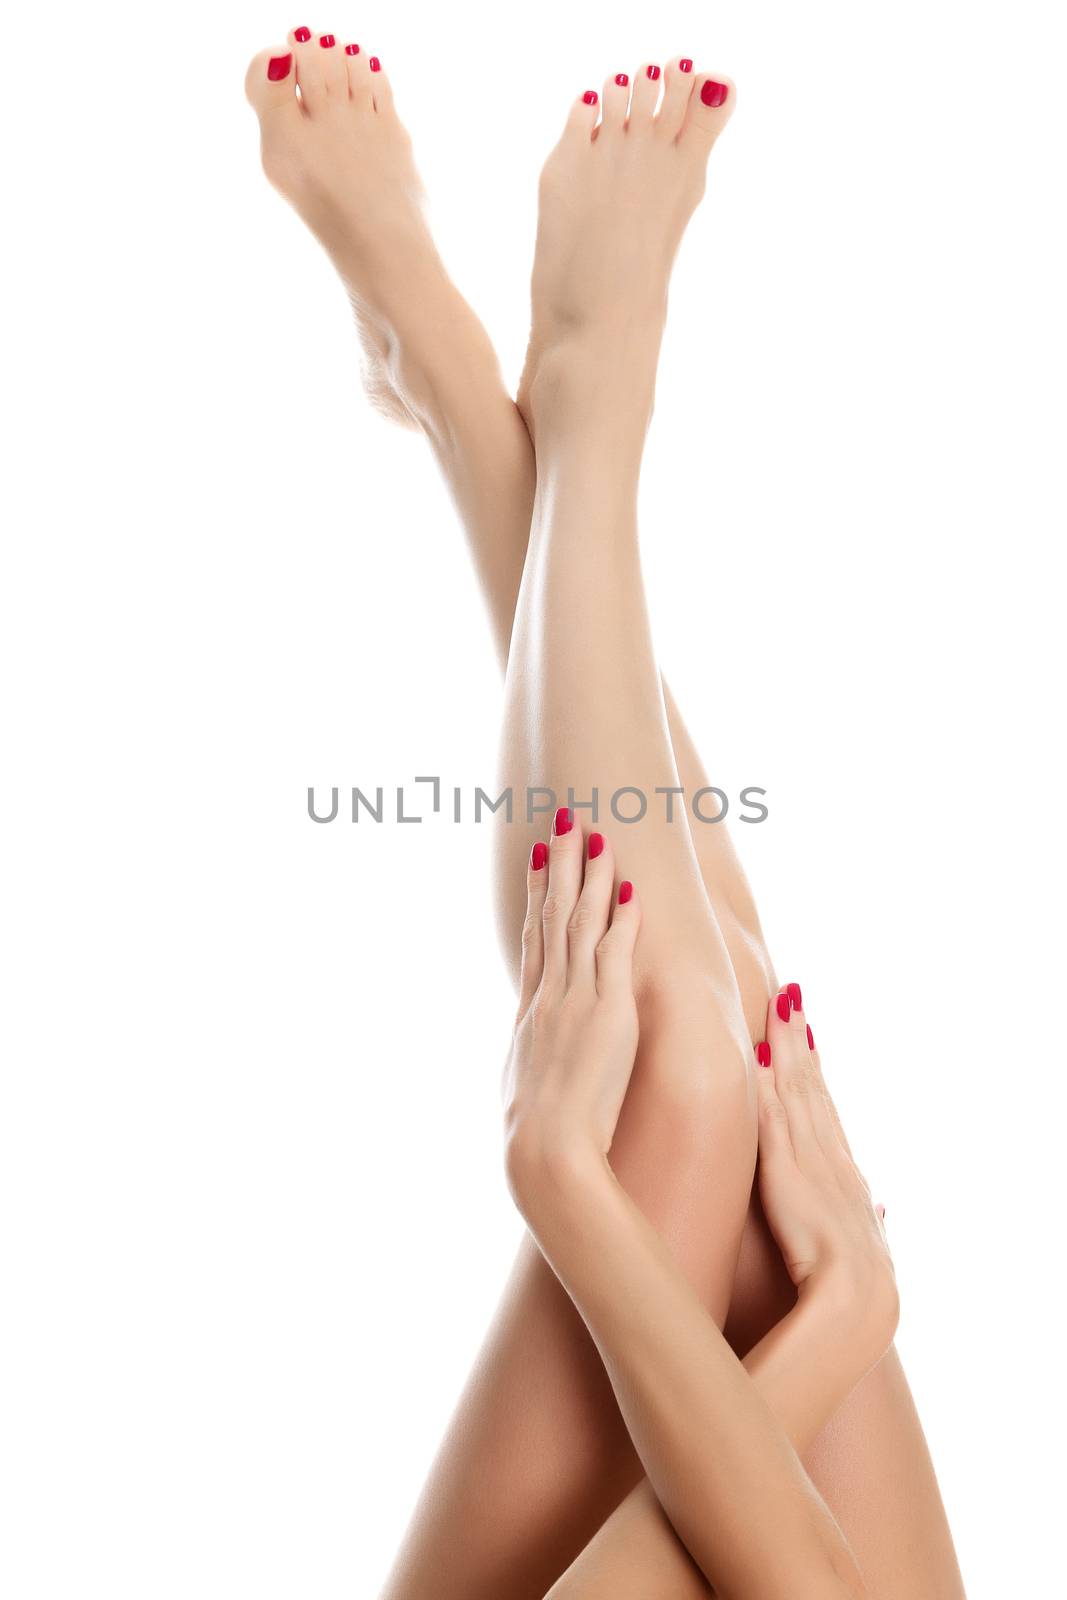 Female legs and hands against a white background, isolated